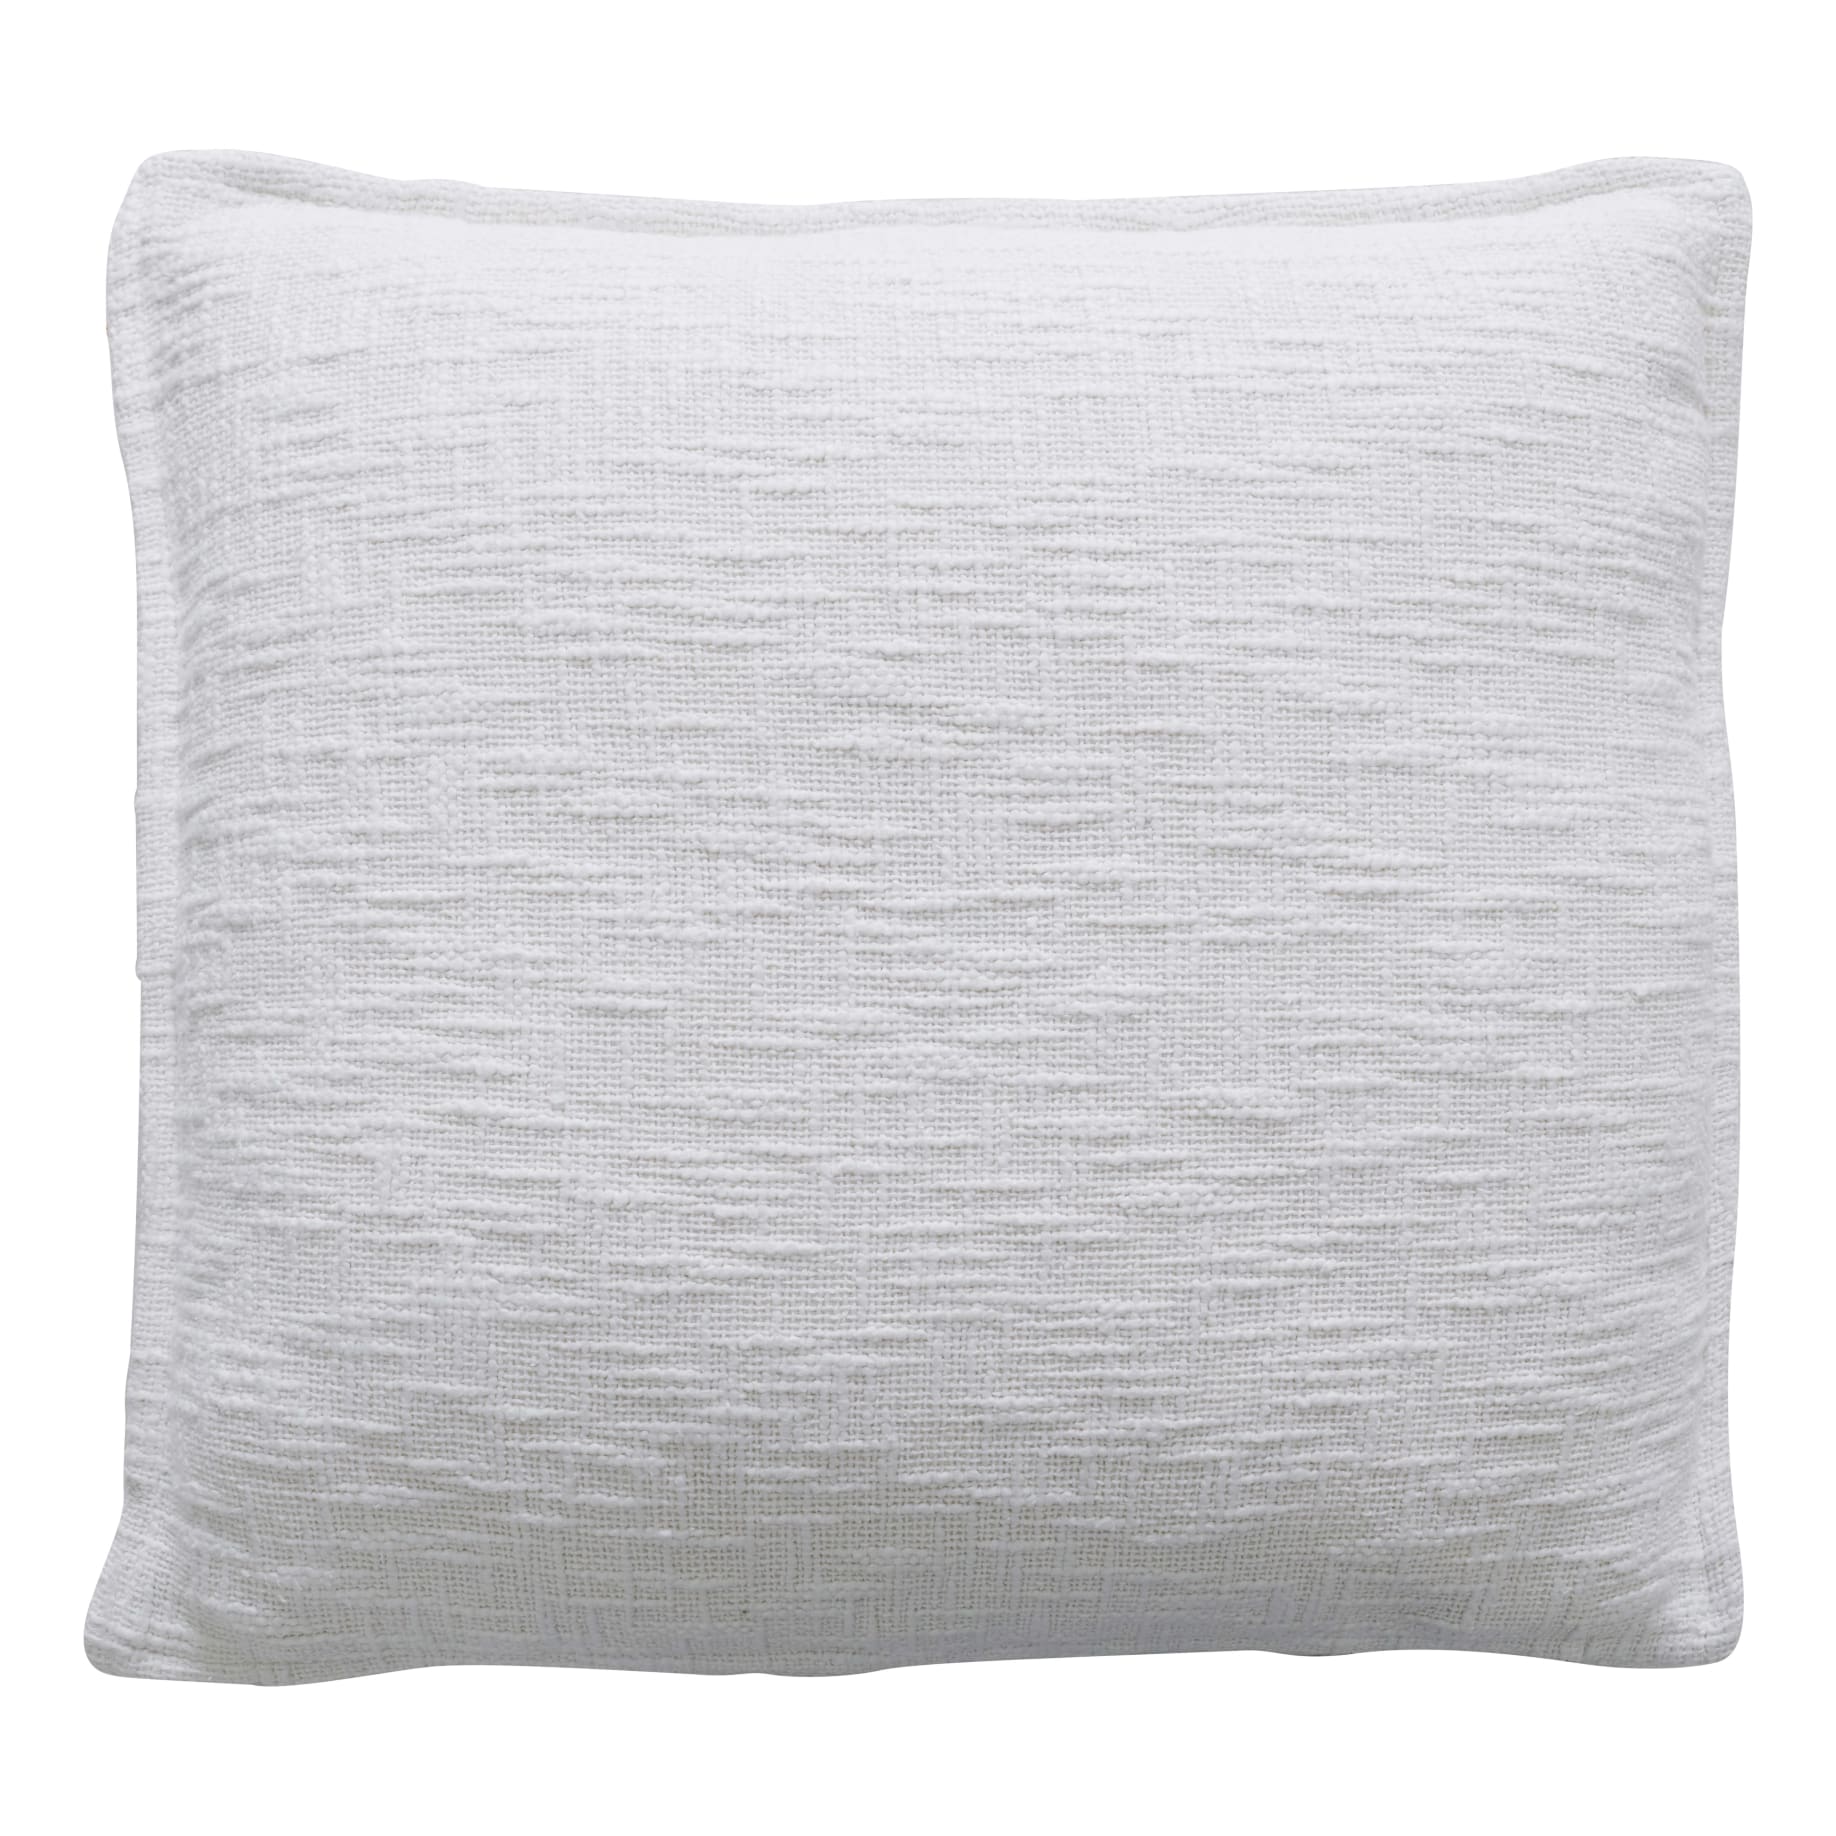 Adler Feather Fill Cushion 50x50cm in White